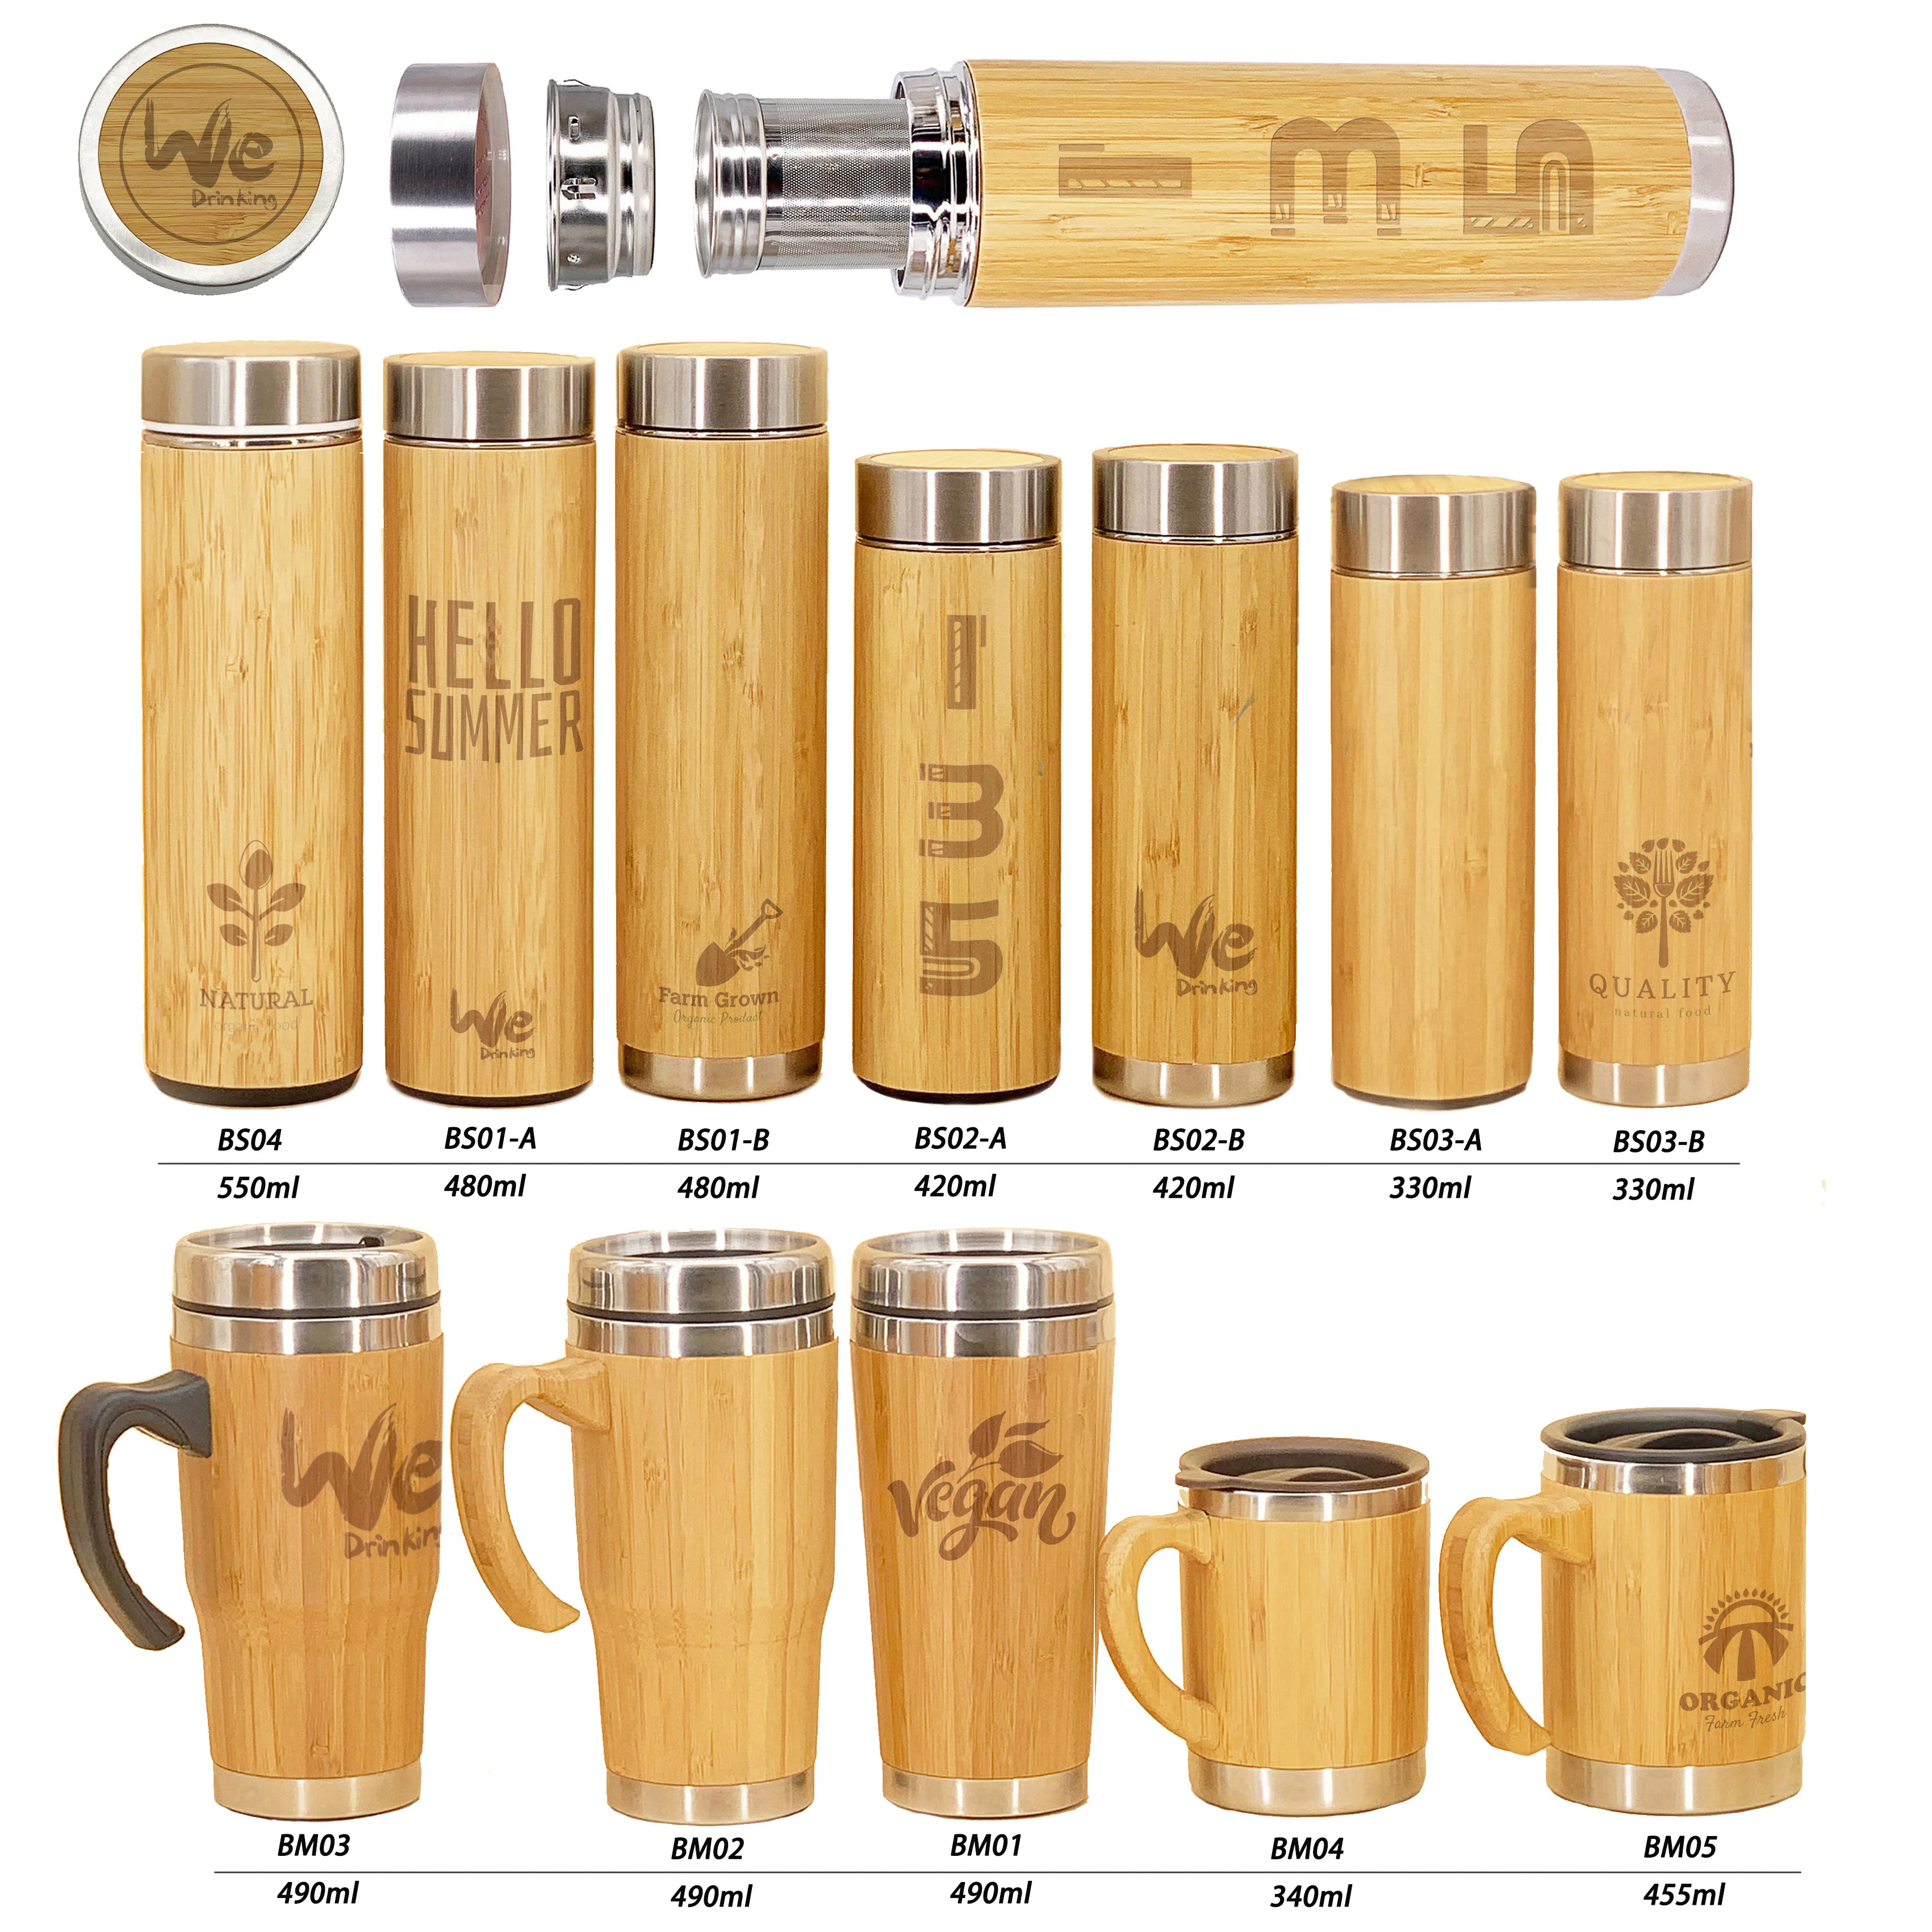 

BS01-B 480ml 17oz Bamboo Tea Tumbler with Tea Infuser and Strainer Mesh Filter for Brewing Loose Leaf and Detox Tea On The Go